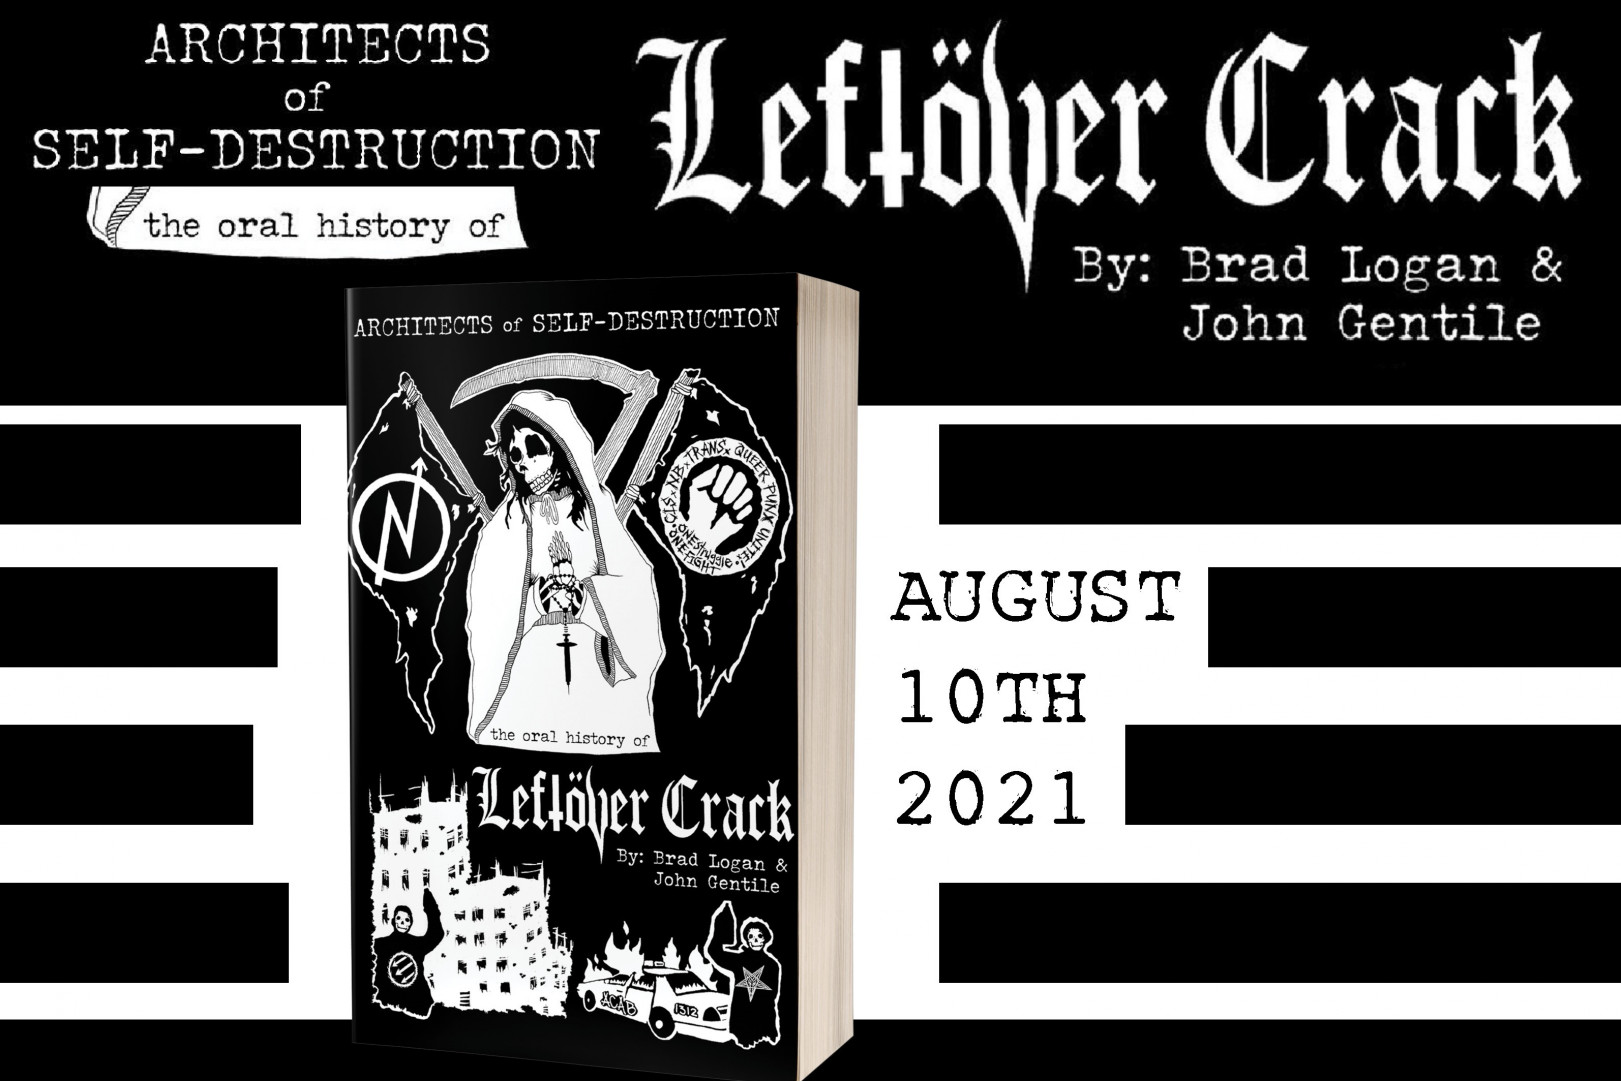 Check out an excerpt from Architects of Self-Destruction: The Oral History of Leftover Crack!